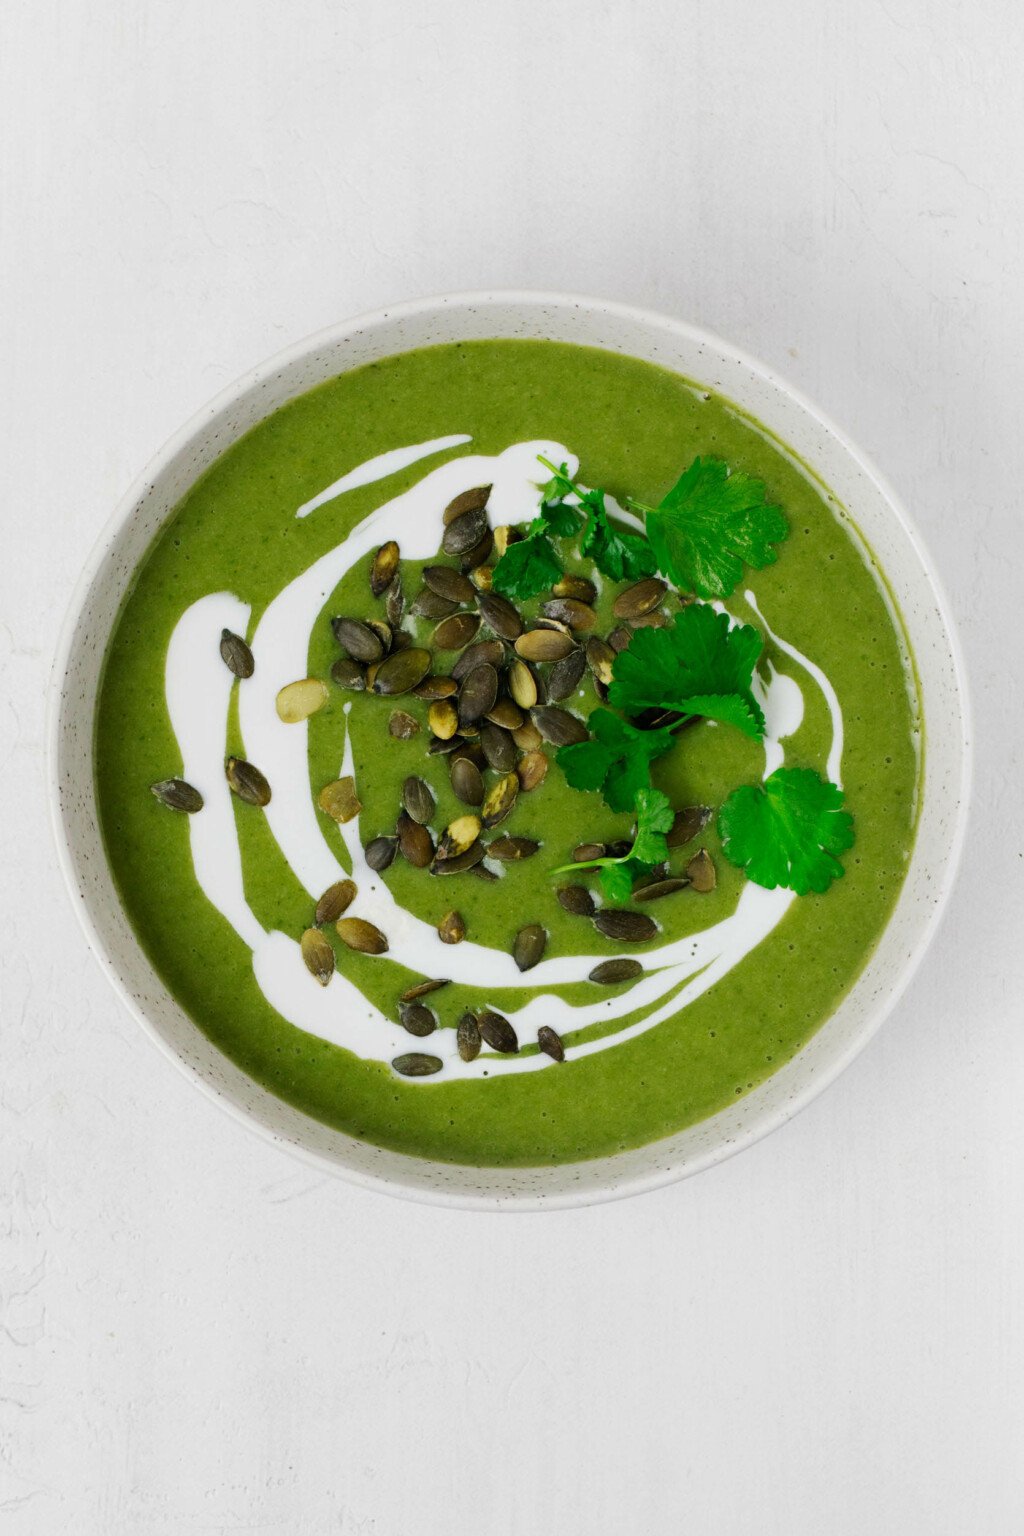 A bowl of vegan green soup has been garnished and plated in a white bowl. The bowl rests on a white surface.